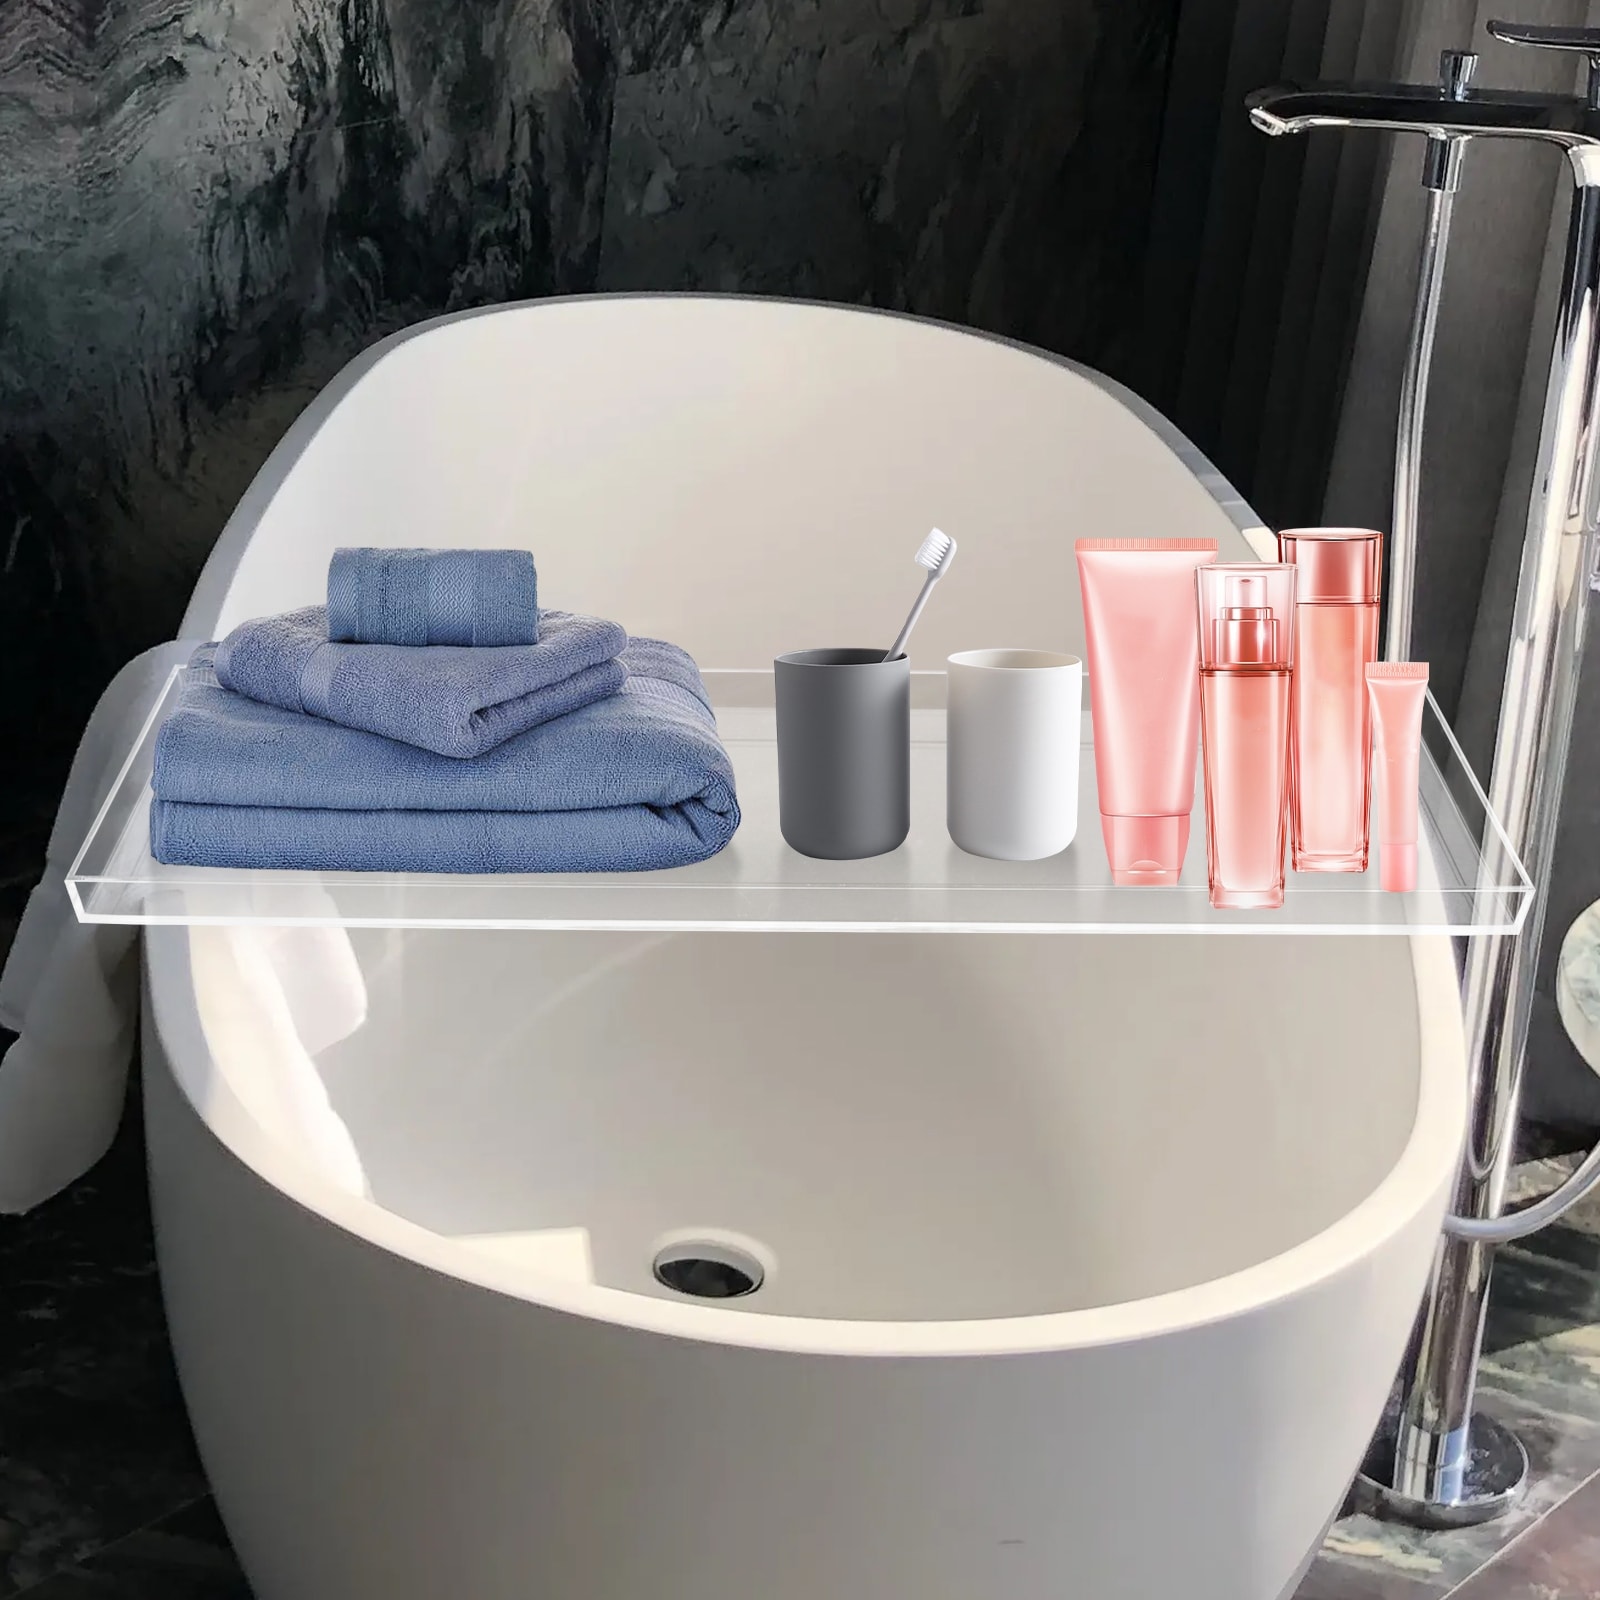 https://ak1.ostkcdn.com/images/products/is/images/direct/f417ccfc1a963bd1e27ce95641e1cd7a103a87b7/Acrylic-Bath-Tray-Over-the-Tub-Clear-Bathtub-Caddy.jpg